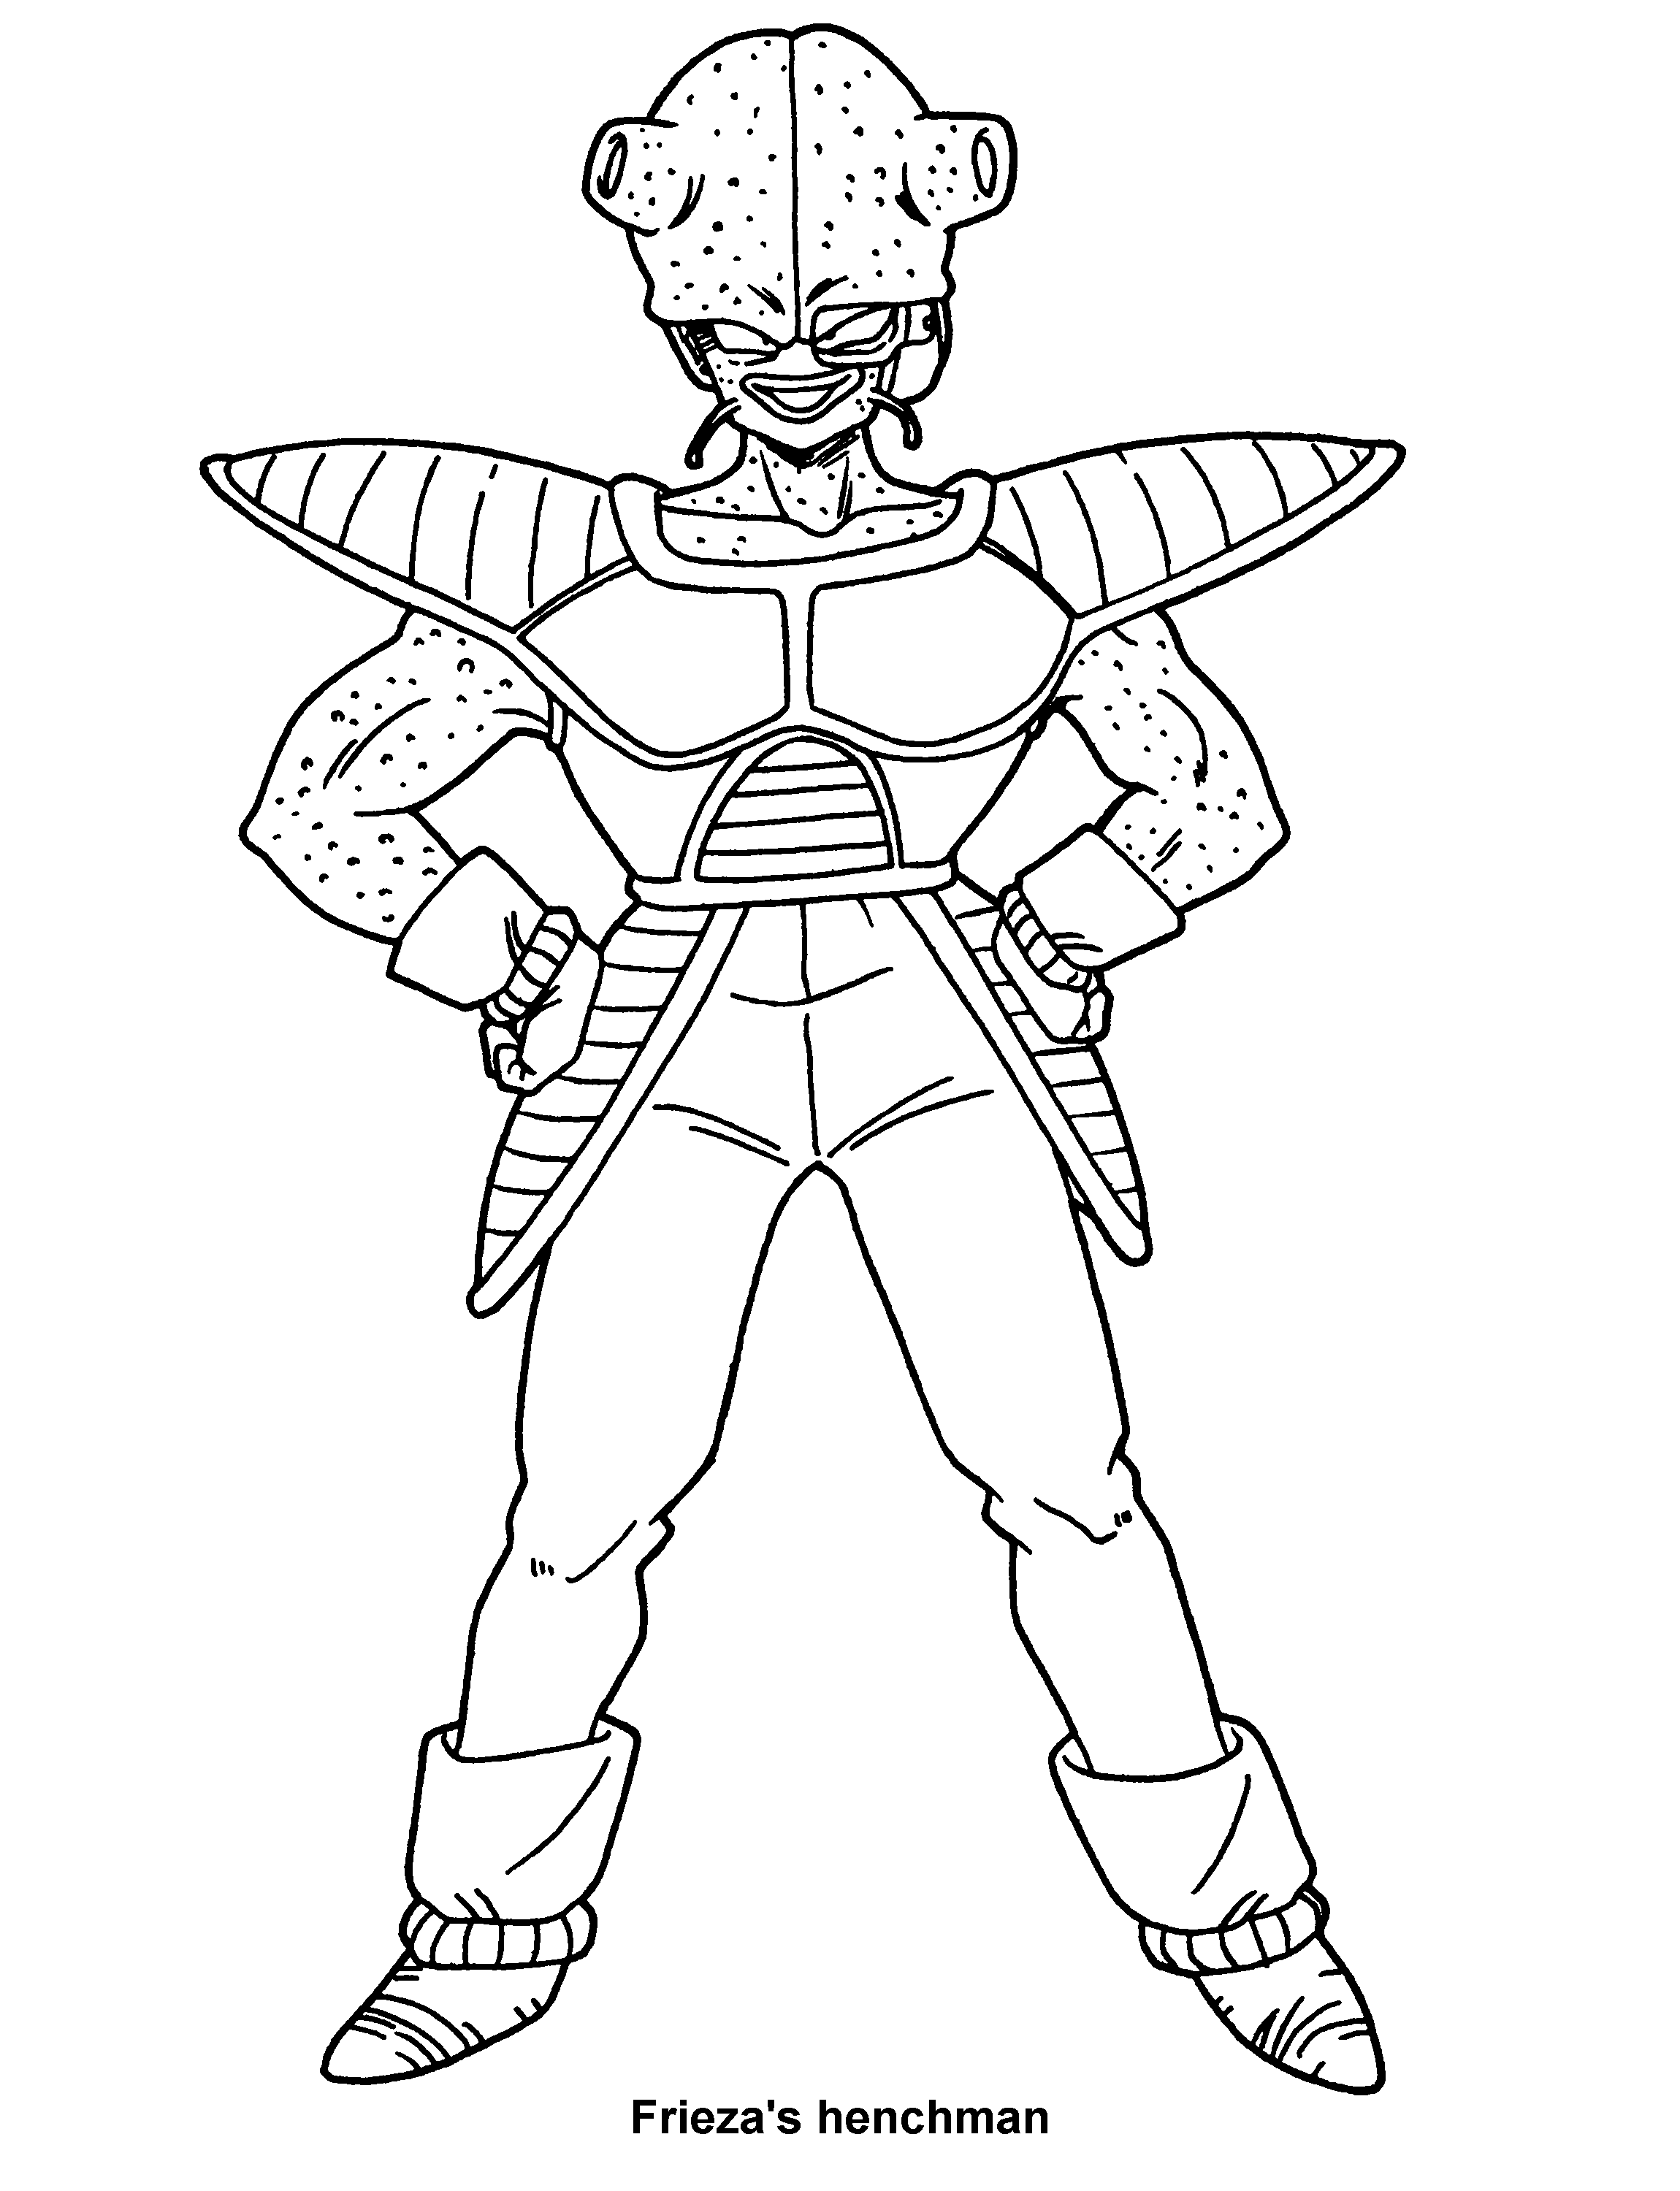 Frieza Coloring Pages - Coloring Home